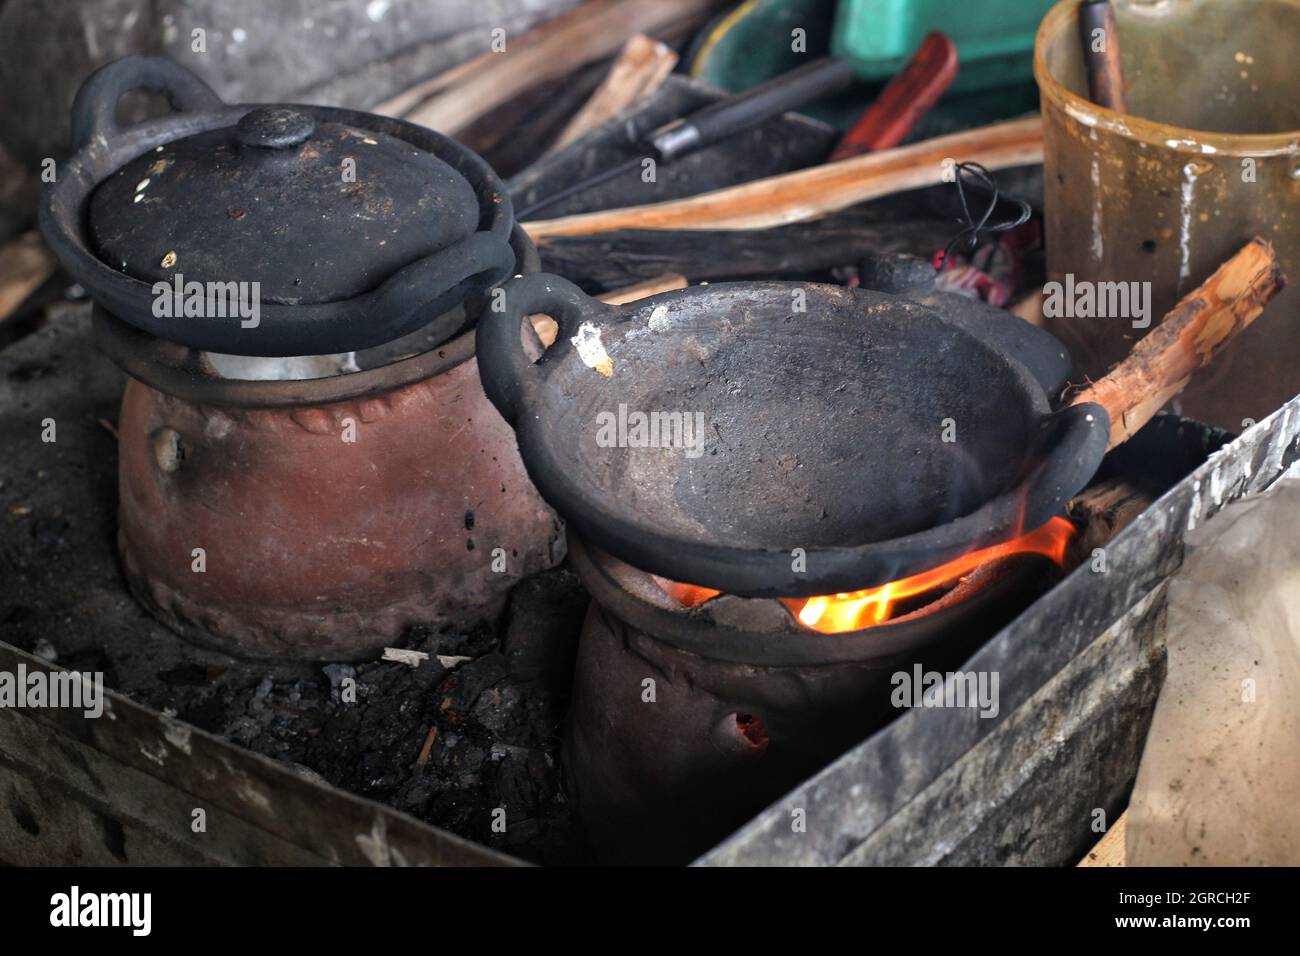 A Tool For Making Traditional Food. Stock Photo